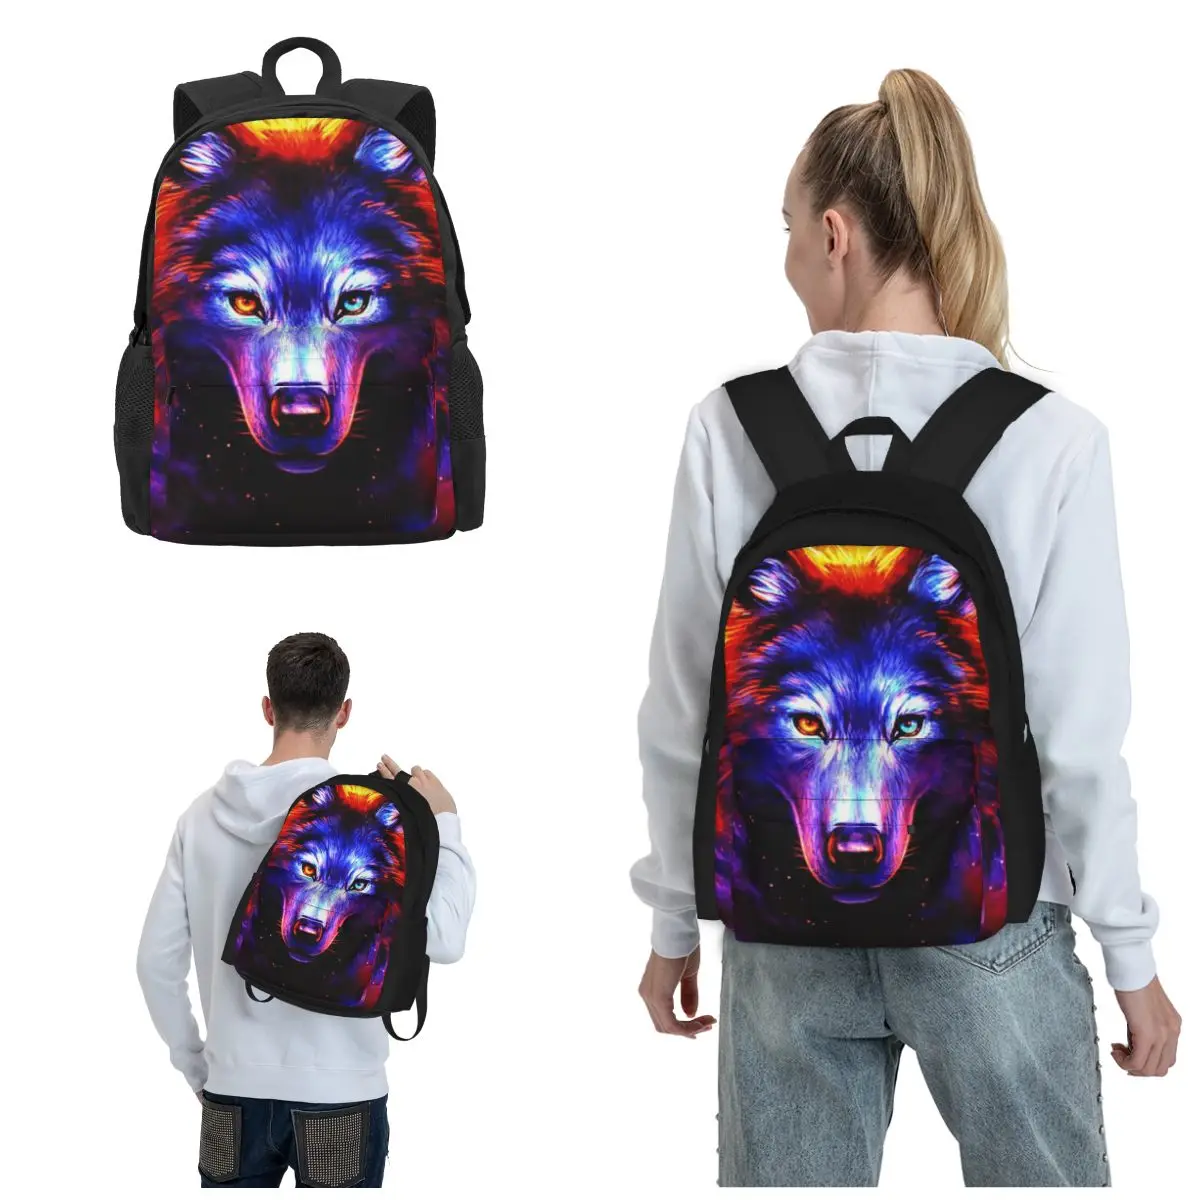 

Fire Wolf Casual Backpack Choose A Backpack That Speaks To Your Personality And Adventure Spirit Portable Sports Bag